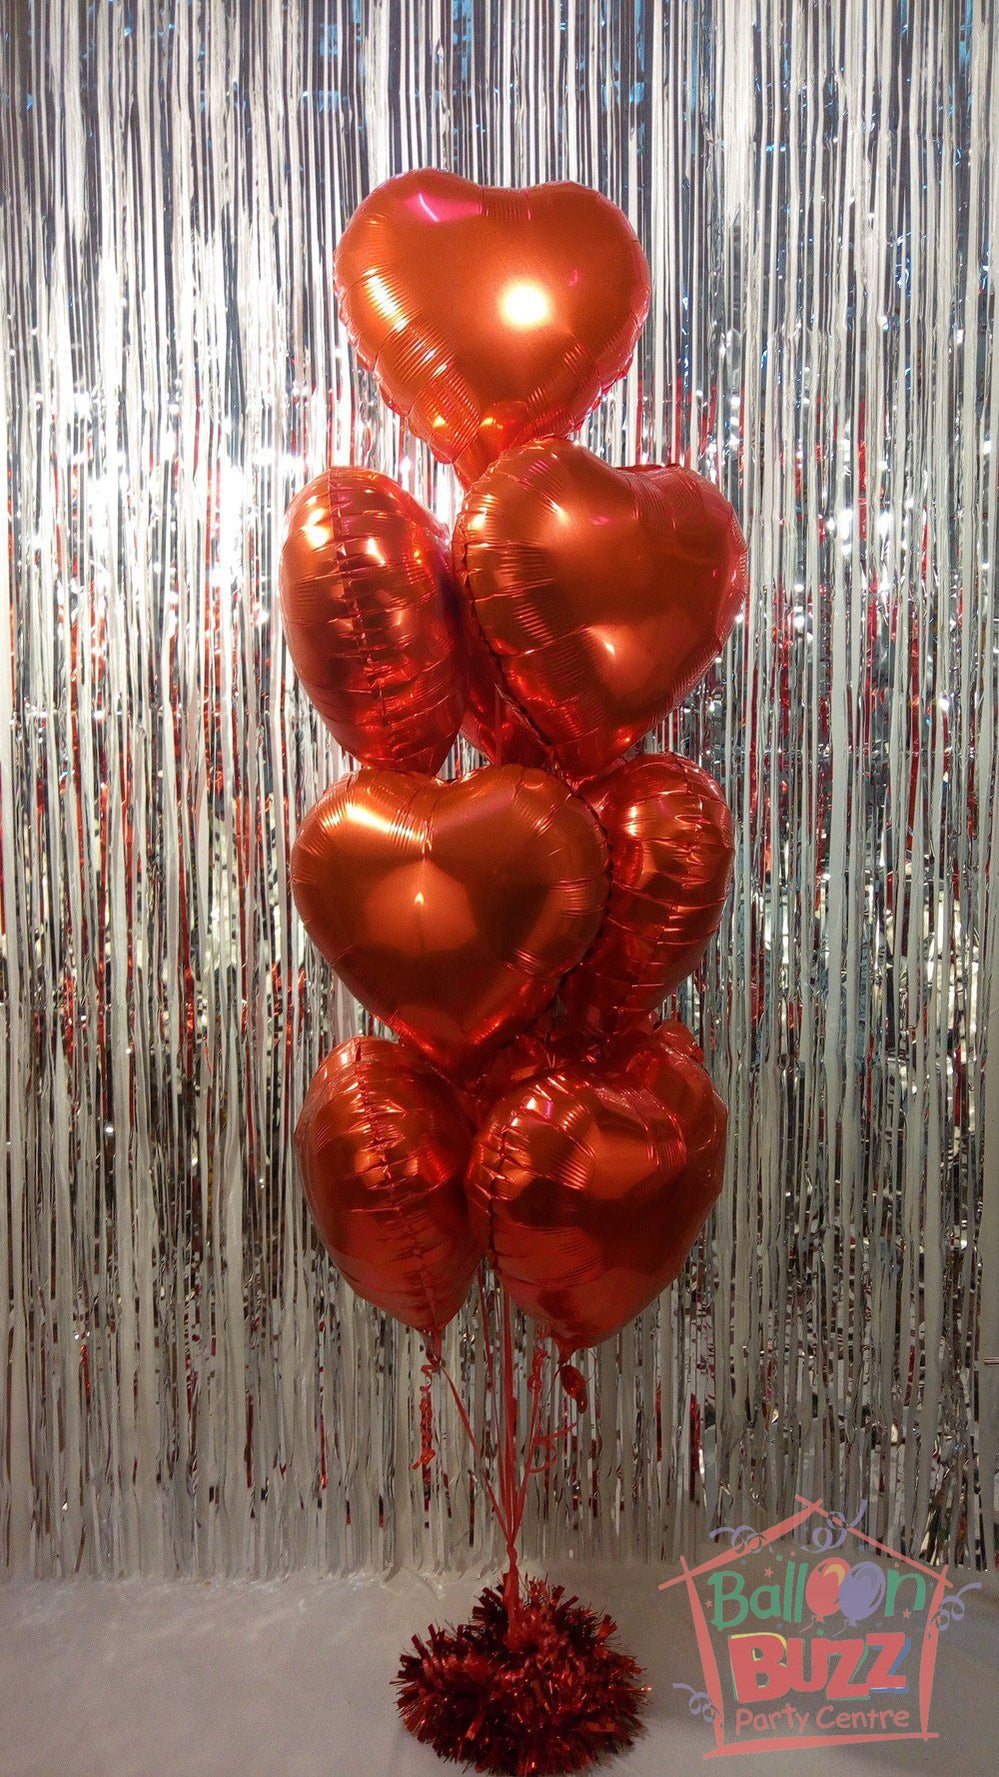 Customized Words on Bouquet of 10 Heart-Shaped Helium-Filled Foil Balloons